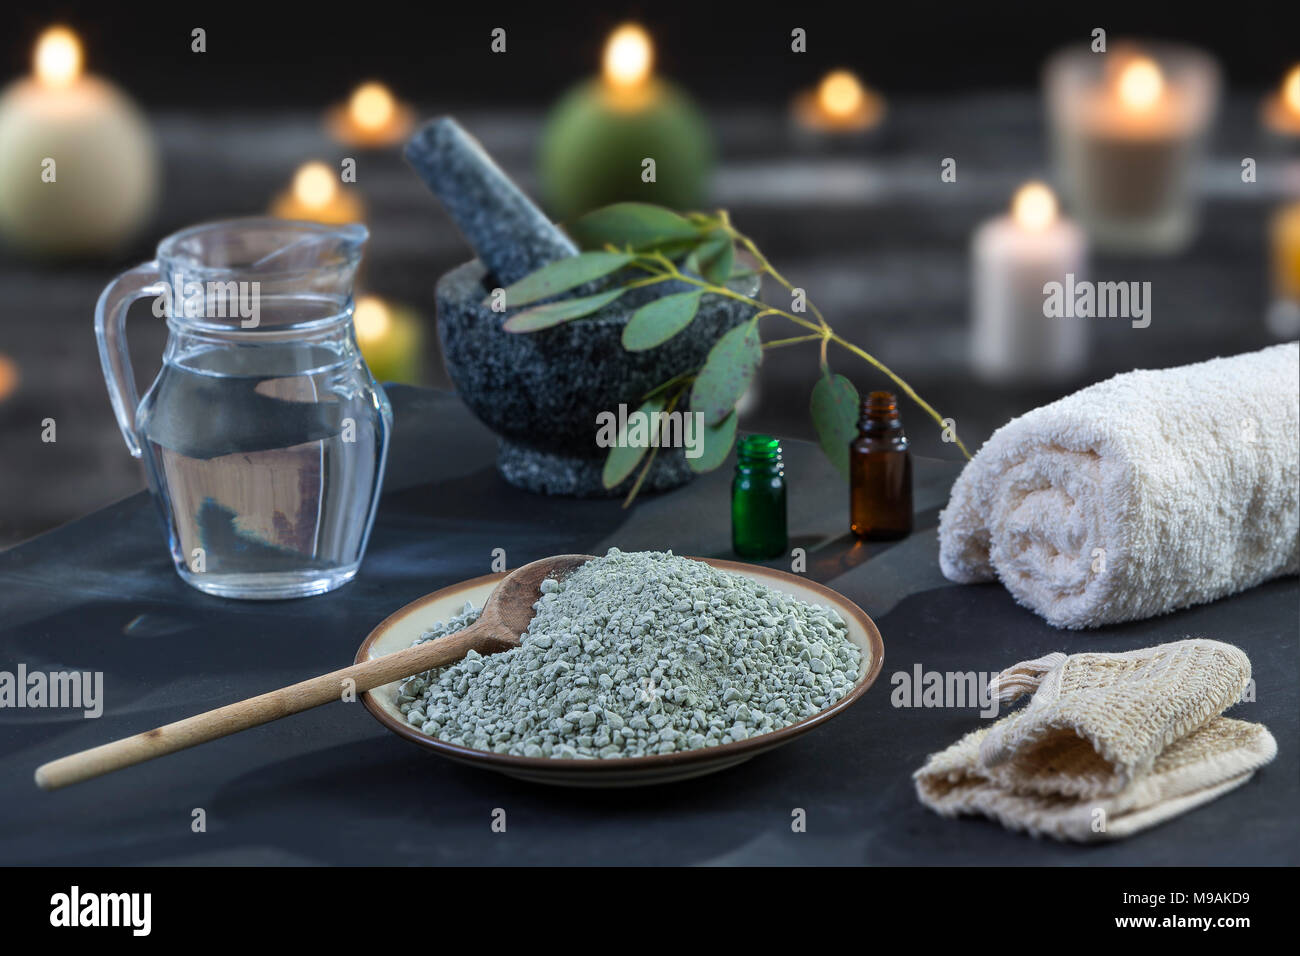 Spa composition on black wooden background. white rolled towels, alight candles, green herbs, eucalyptus clay mask for face and body, Stock Photo